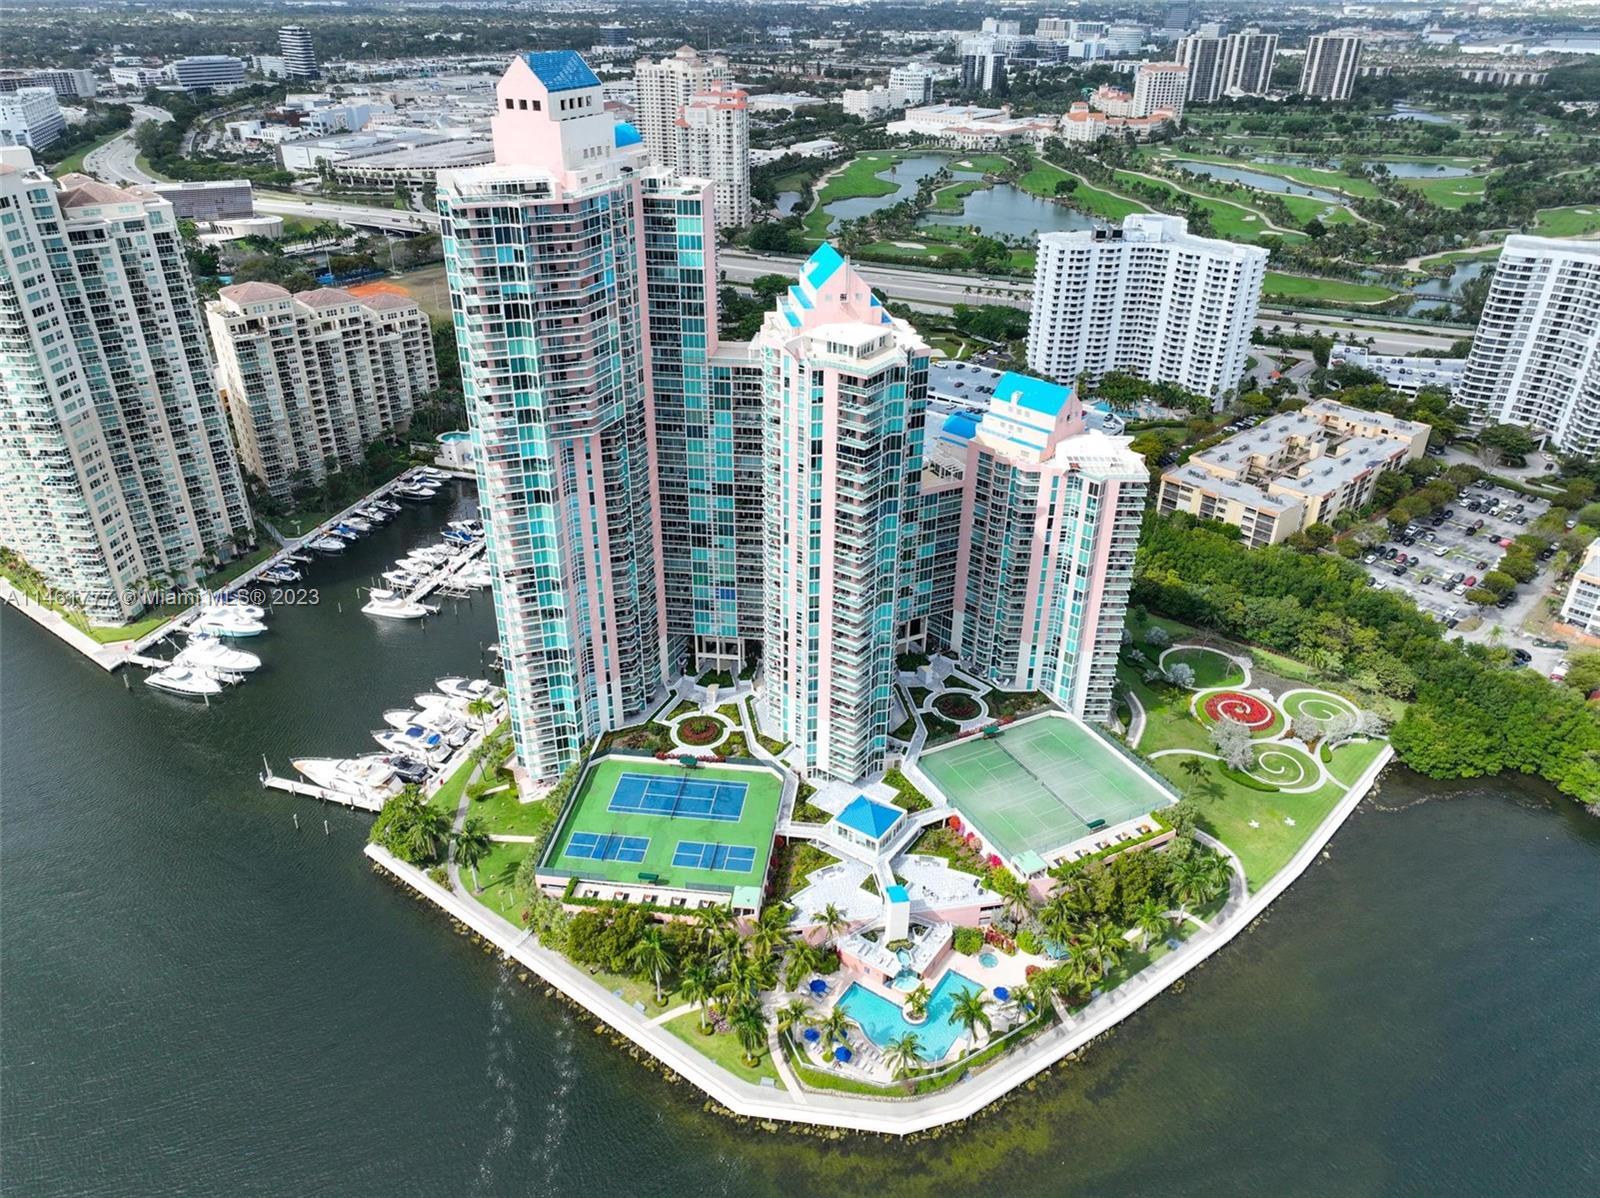 Experience a heavenly oasis in the sky, boasting awe-inspiring Intracoastal and ocean panoramas alon